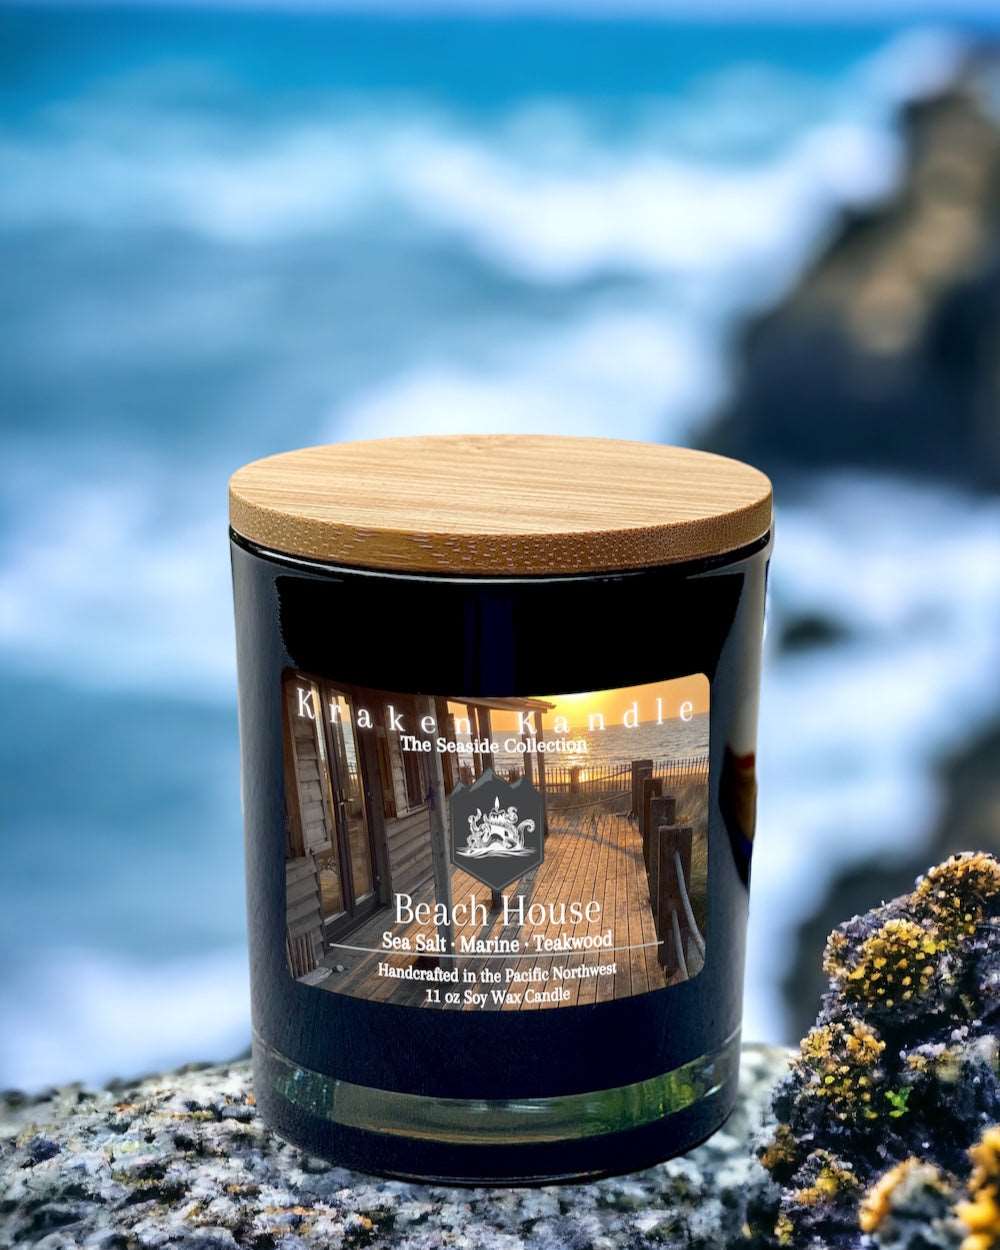 Beach House candle on the seashore with cliff and ocean in the background Kraken Kandle